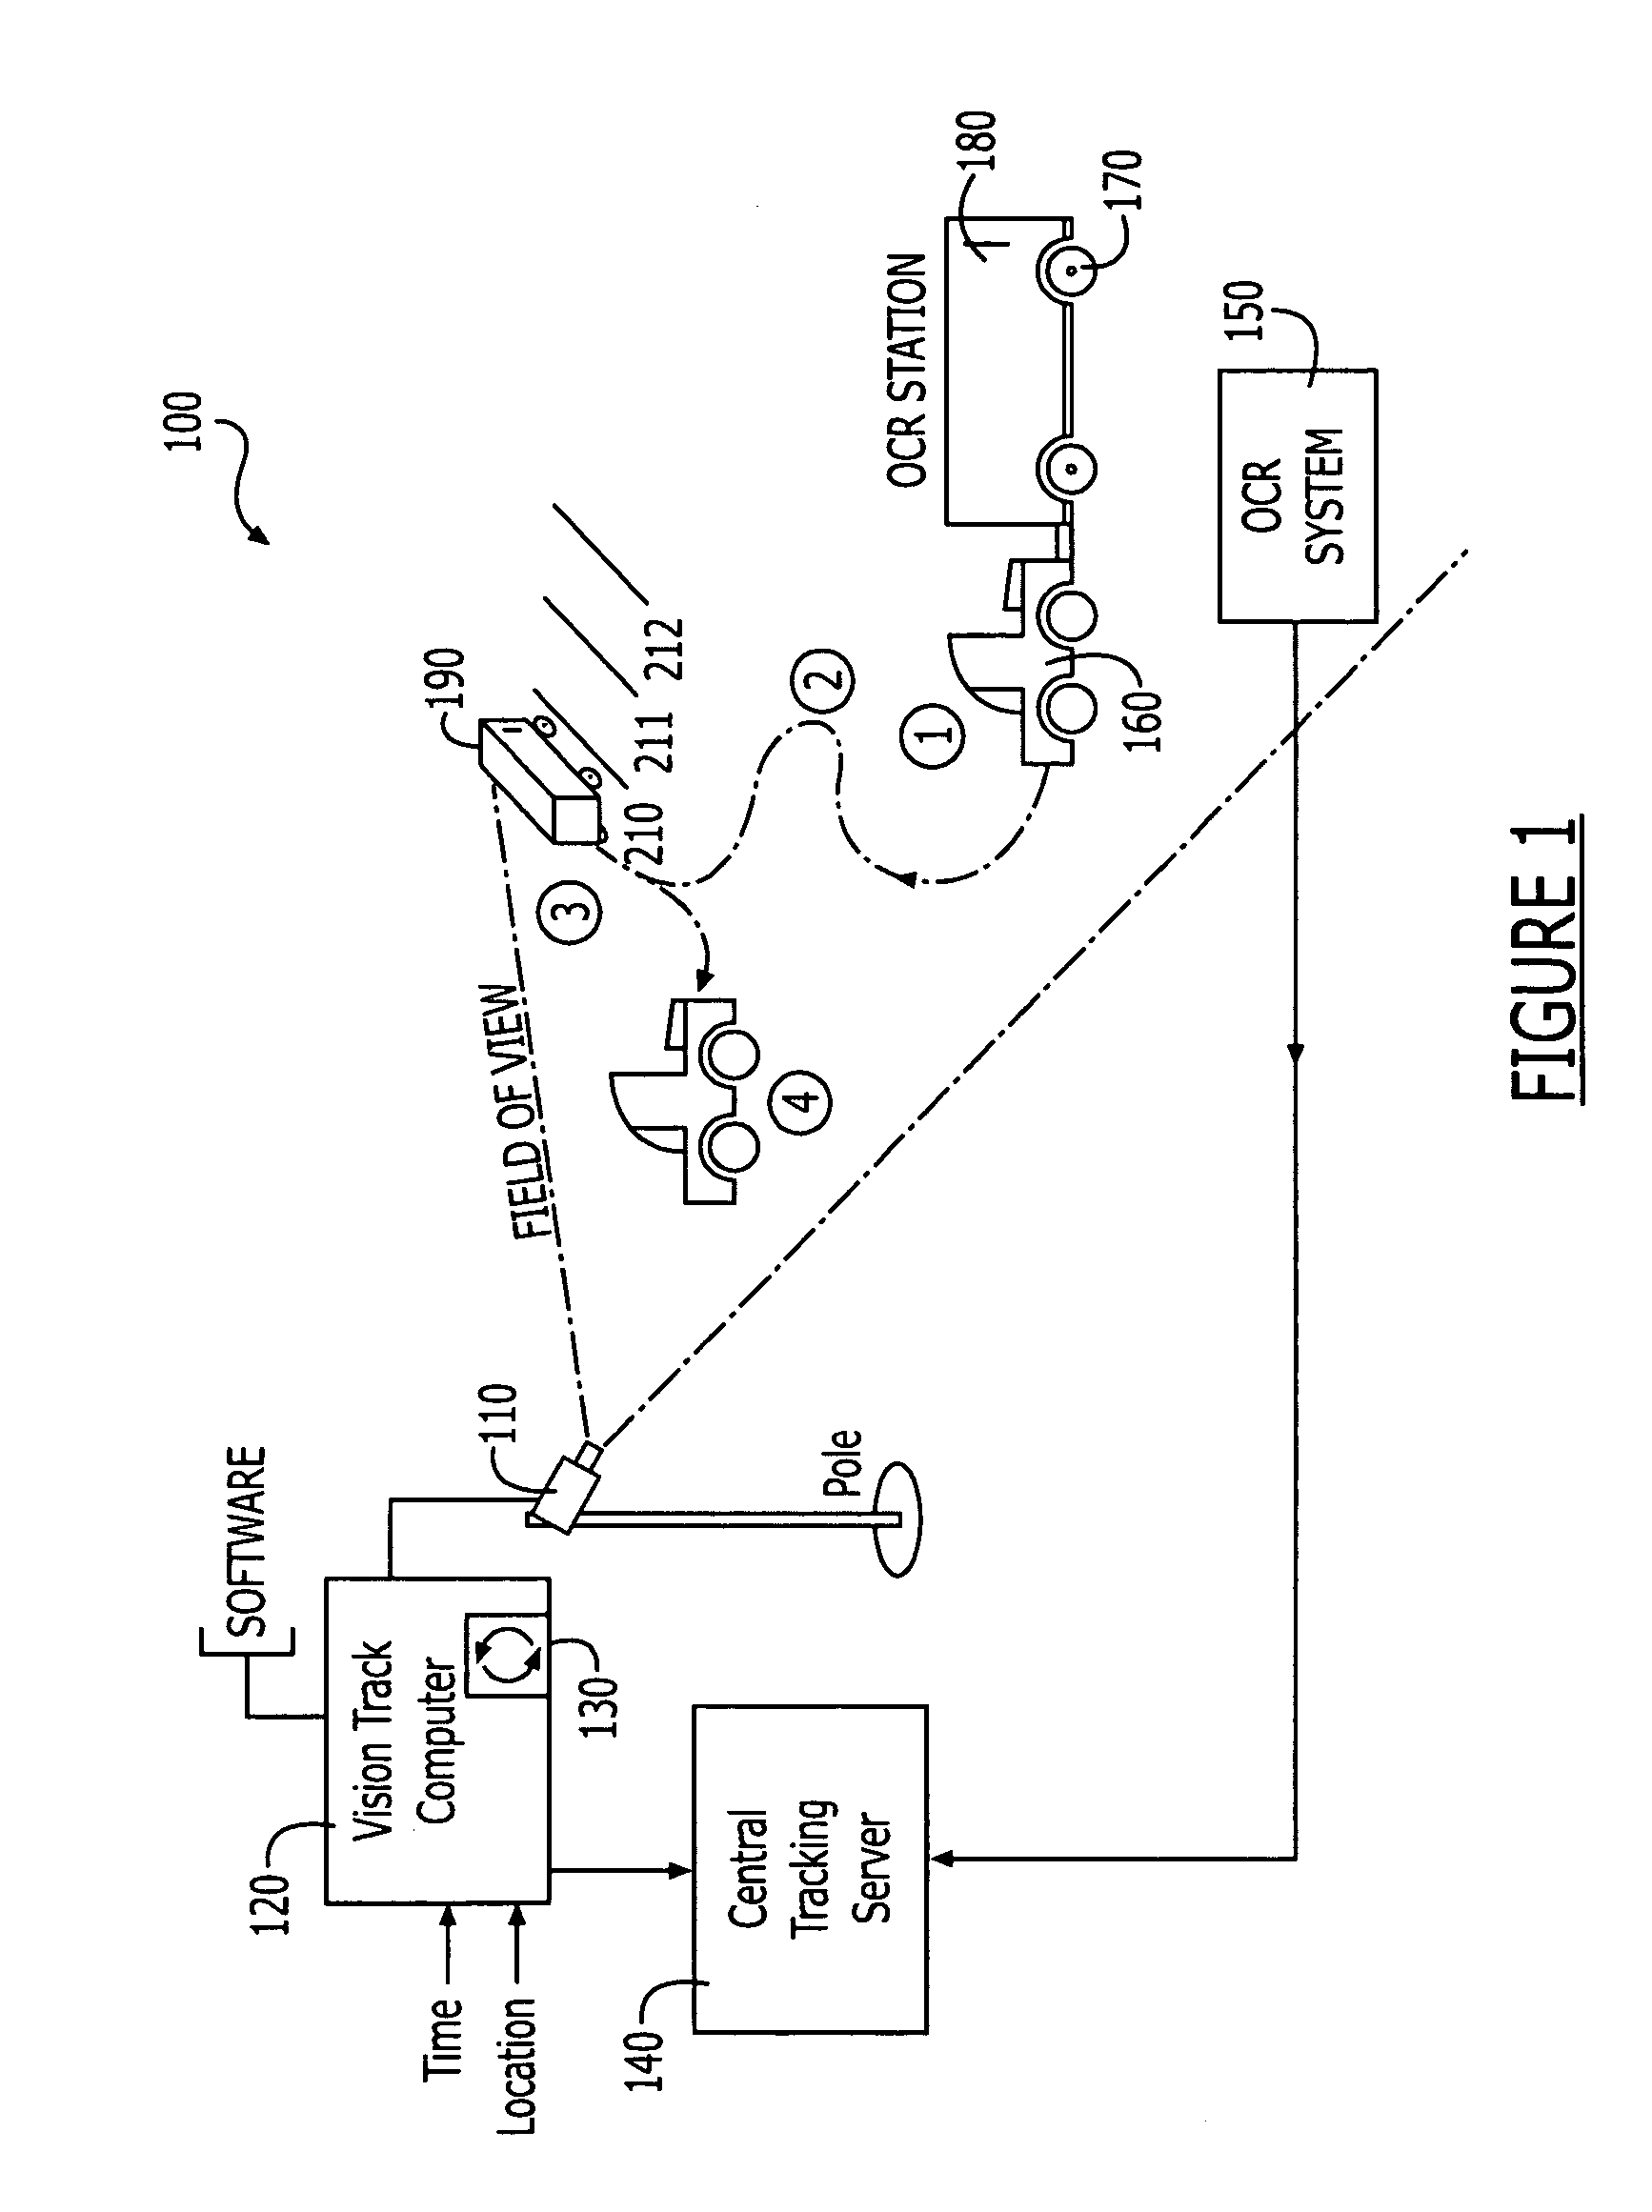 Systems and methods for monitoring and tracking movement and location of shipping containers and vehicles using a vision based system